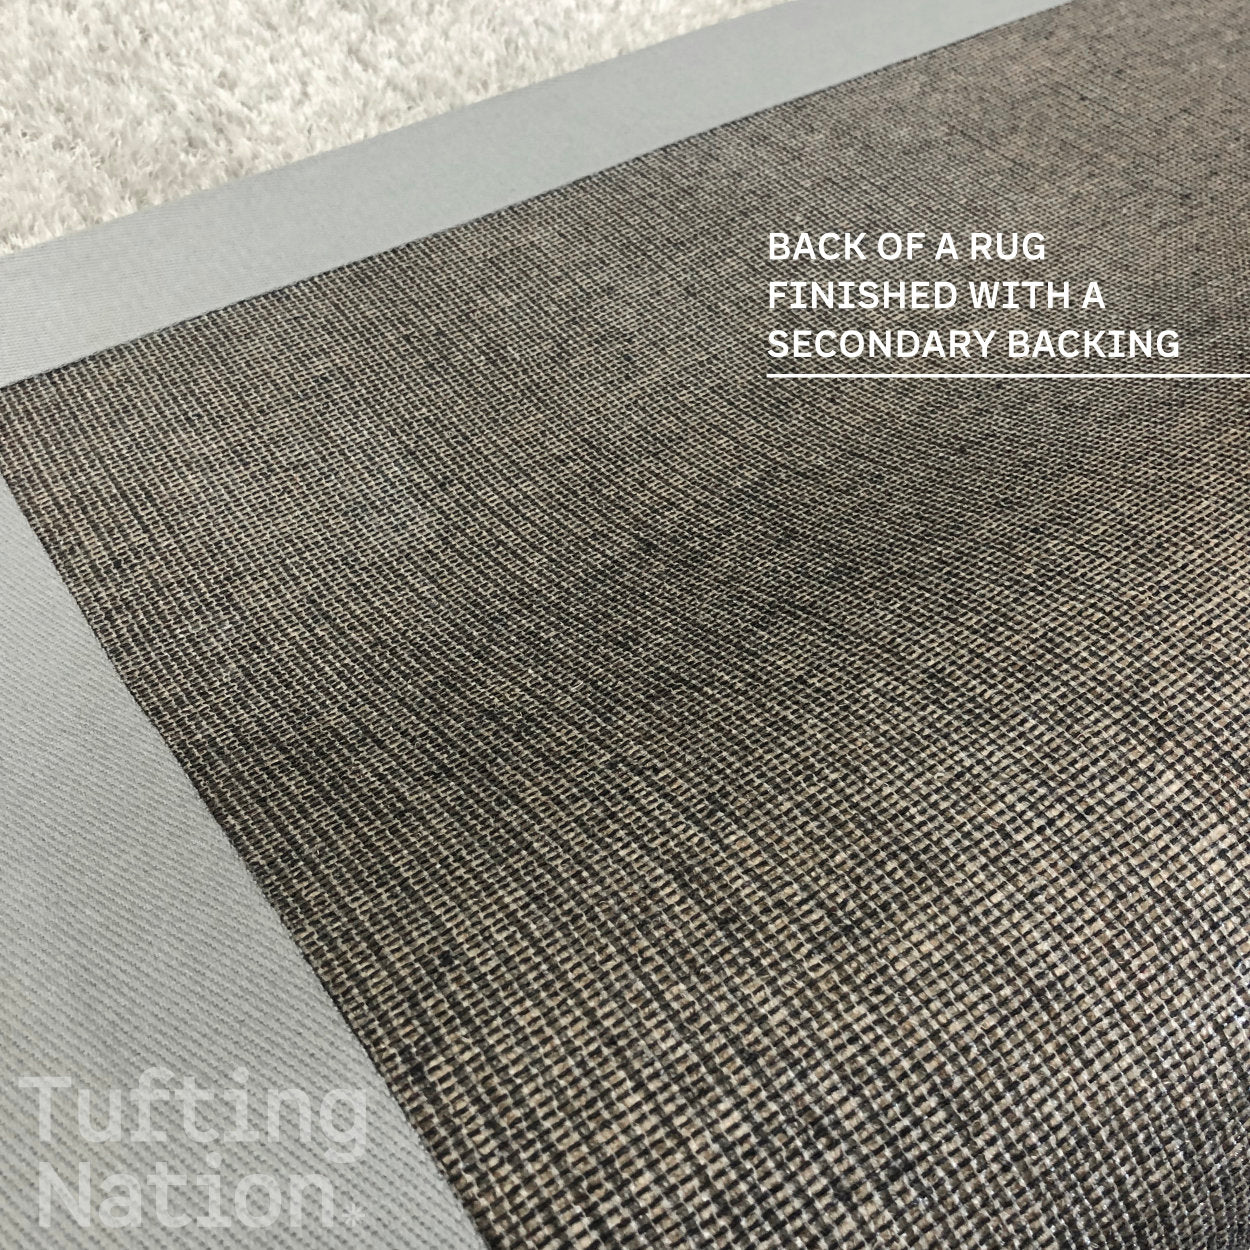 Action Bac Backing Cloth applied on the back of a handmade tufted rug | TuftingNation